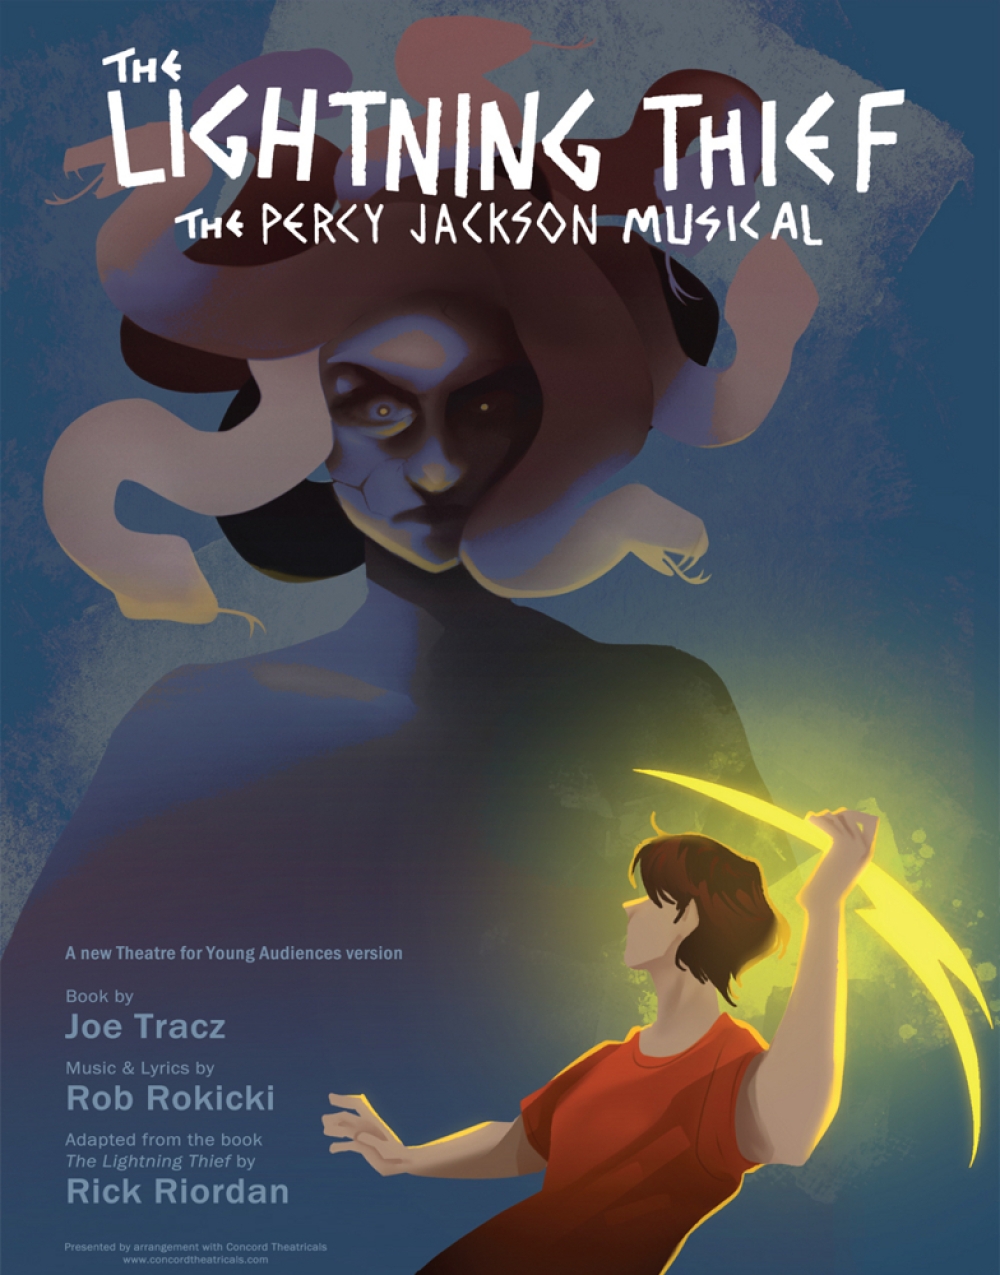 The Lightning Thief: The Percy Jackson Musical at The Coterie Theatre